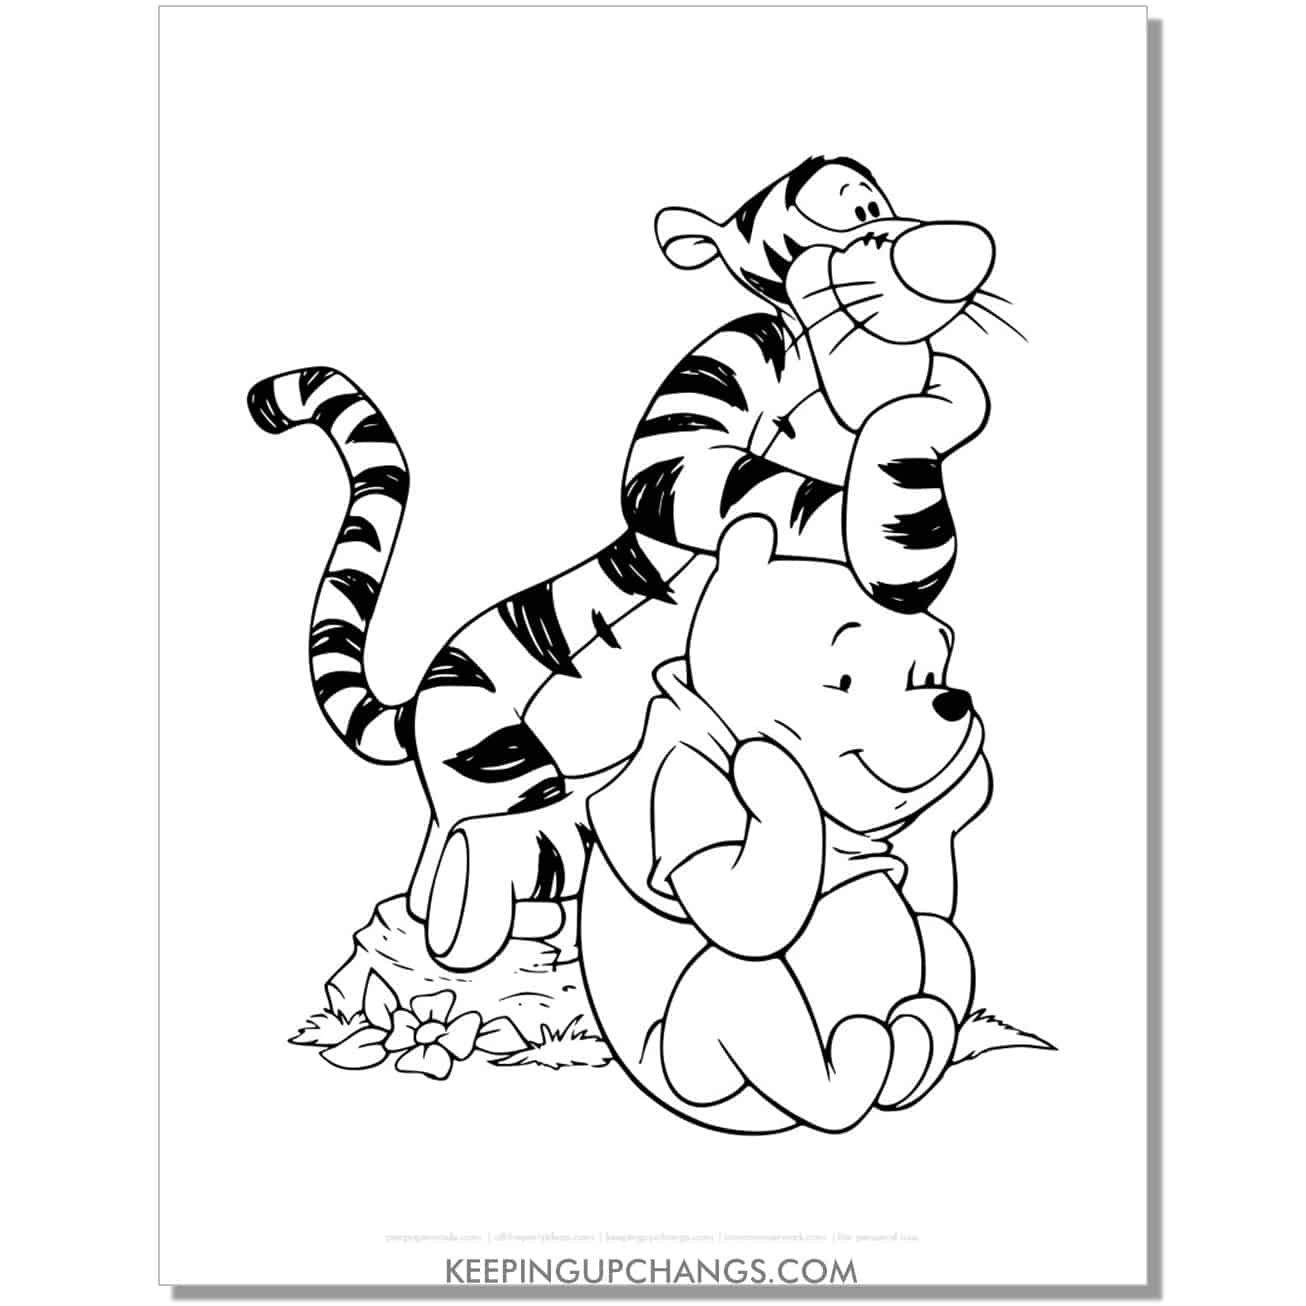 tigger rests hand on winnie the pooh's head coloring page, sheet.